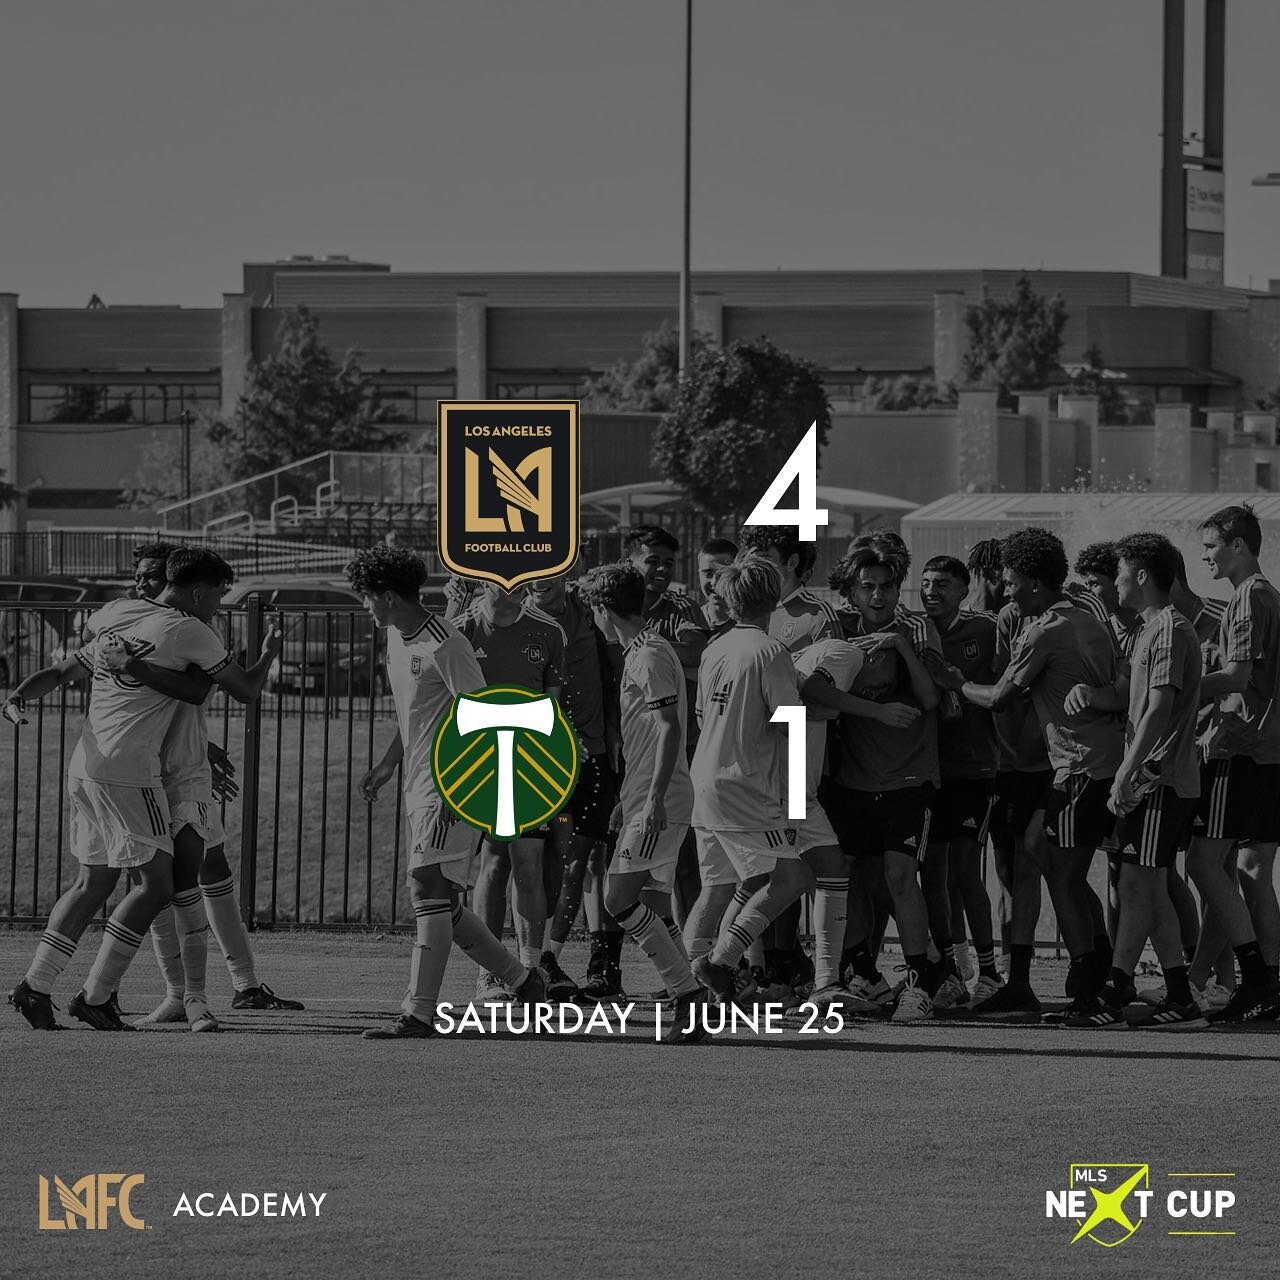 Great start to the @mlsnext Cup with a 4-1 win over @timbersfcacademy. Onto @austinfcacademy today at 7pm CST. @lafcacademy